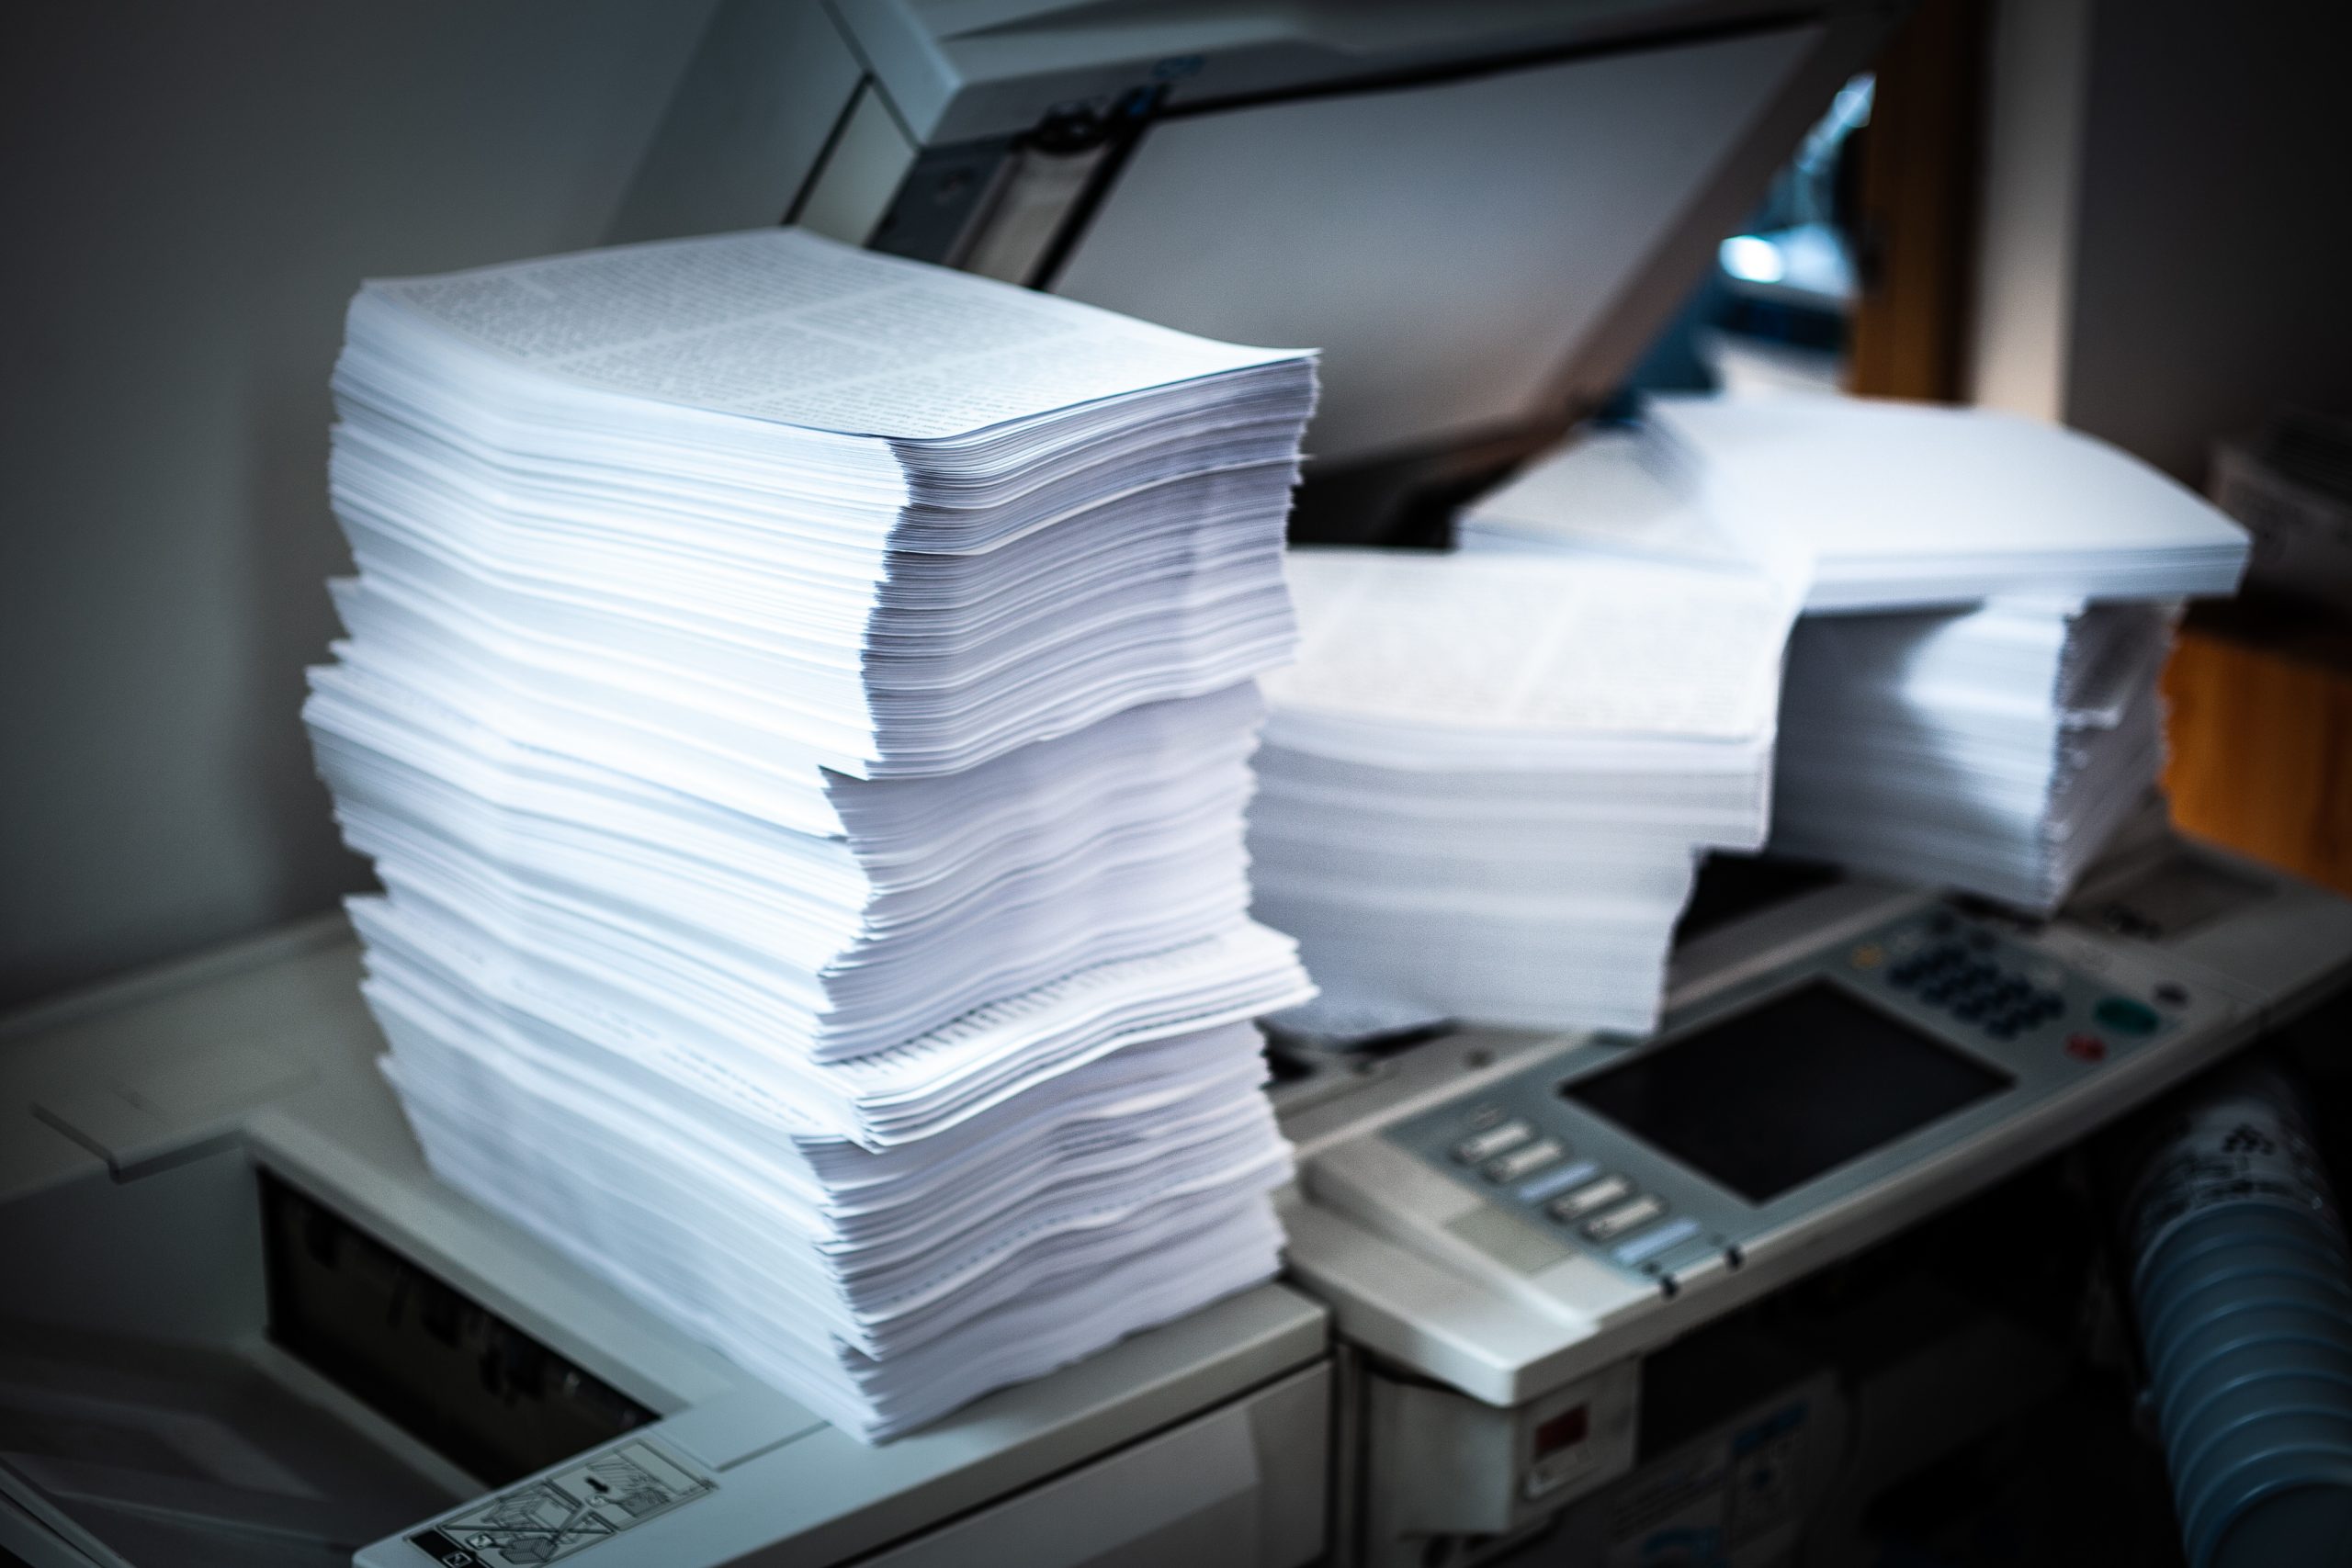 Total printing-writing paper shipments decreased 30% - The Recycler -  26/05/2020